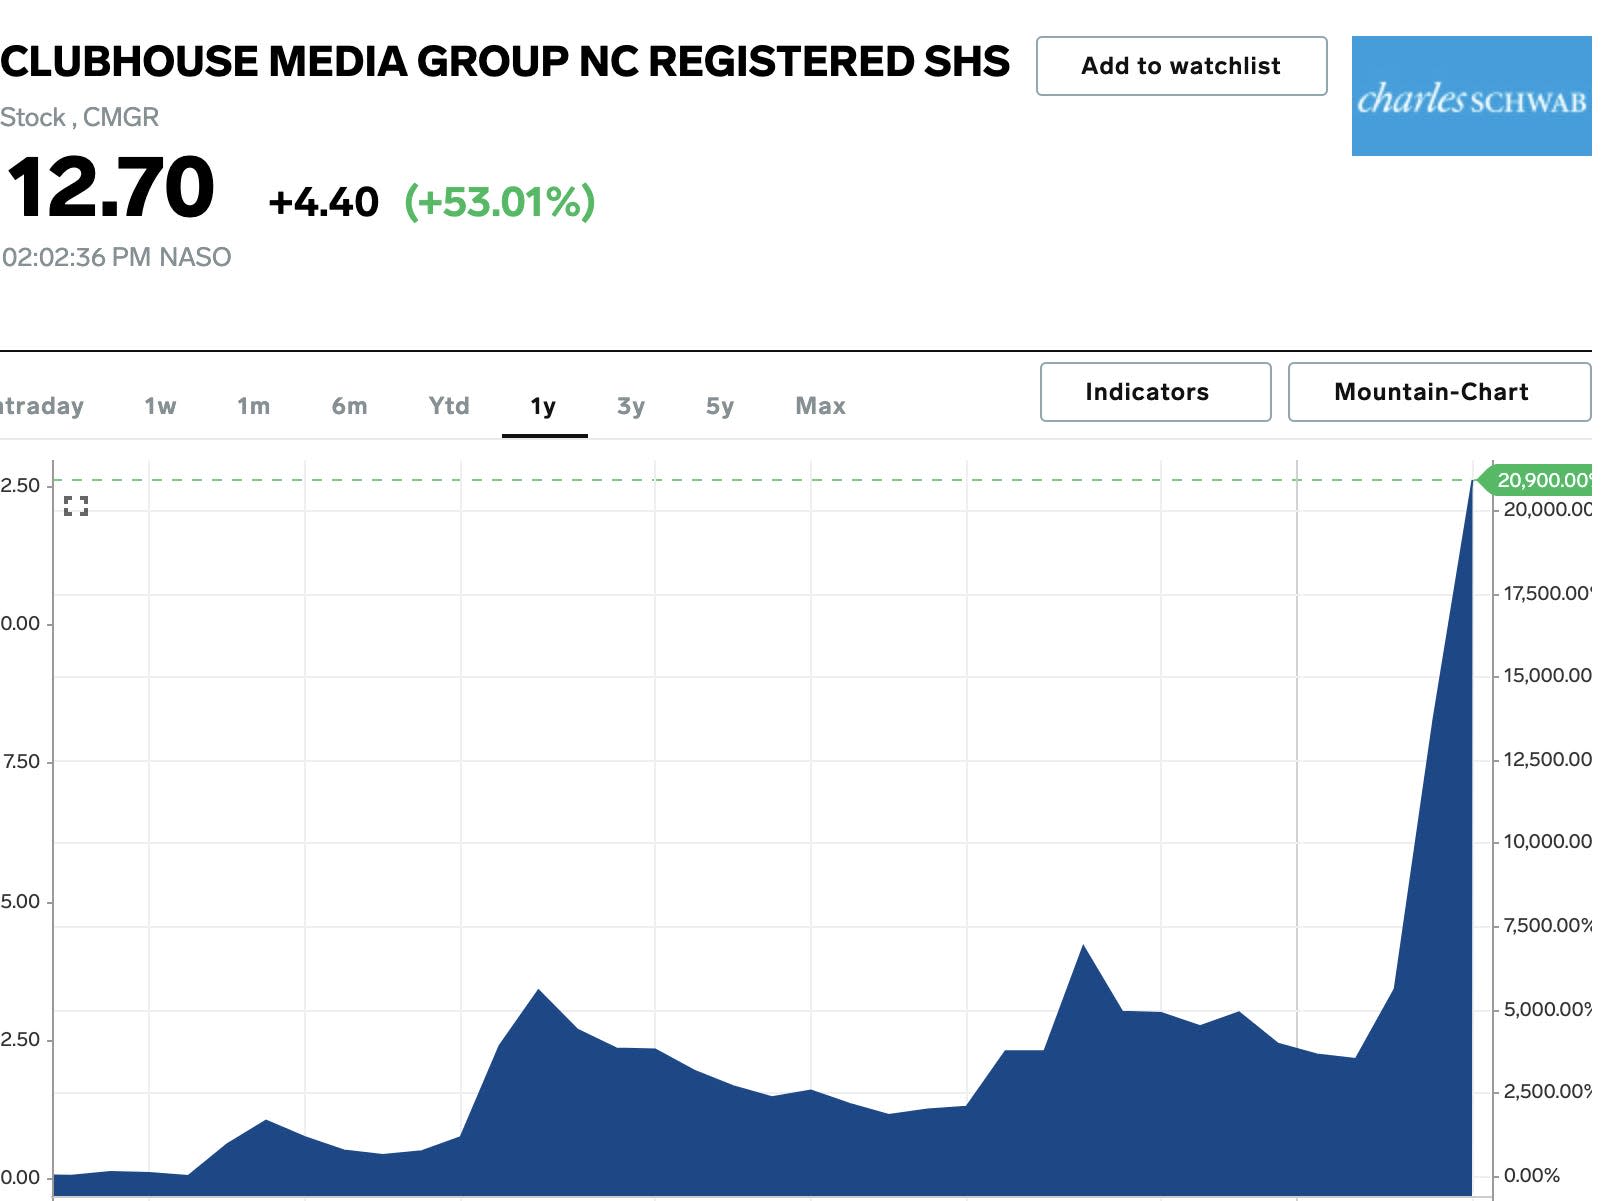 Clubhouse stock skyrocketed after Elon Musk tweeted about an unrelated social media app of the same name